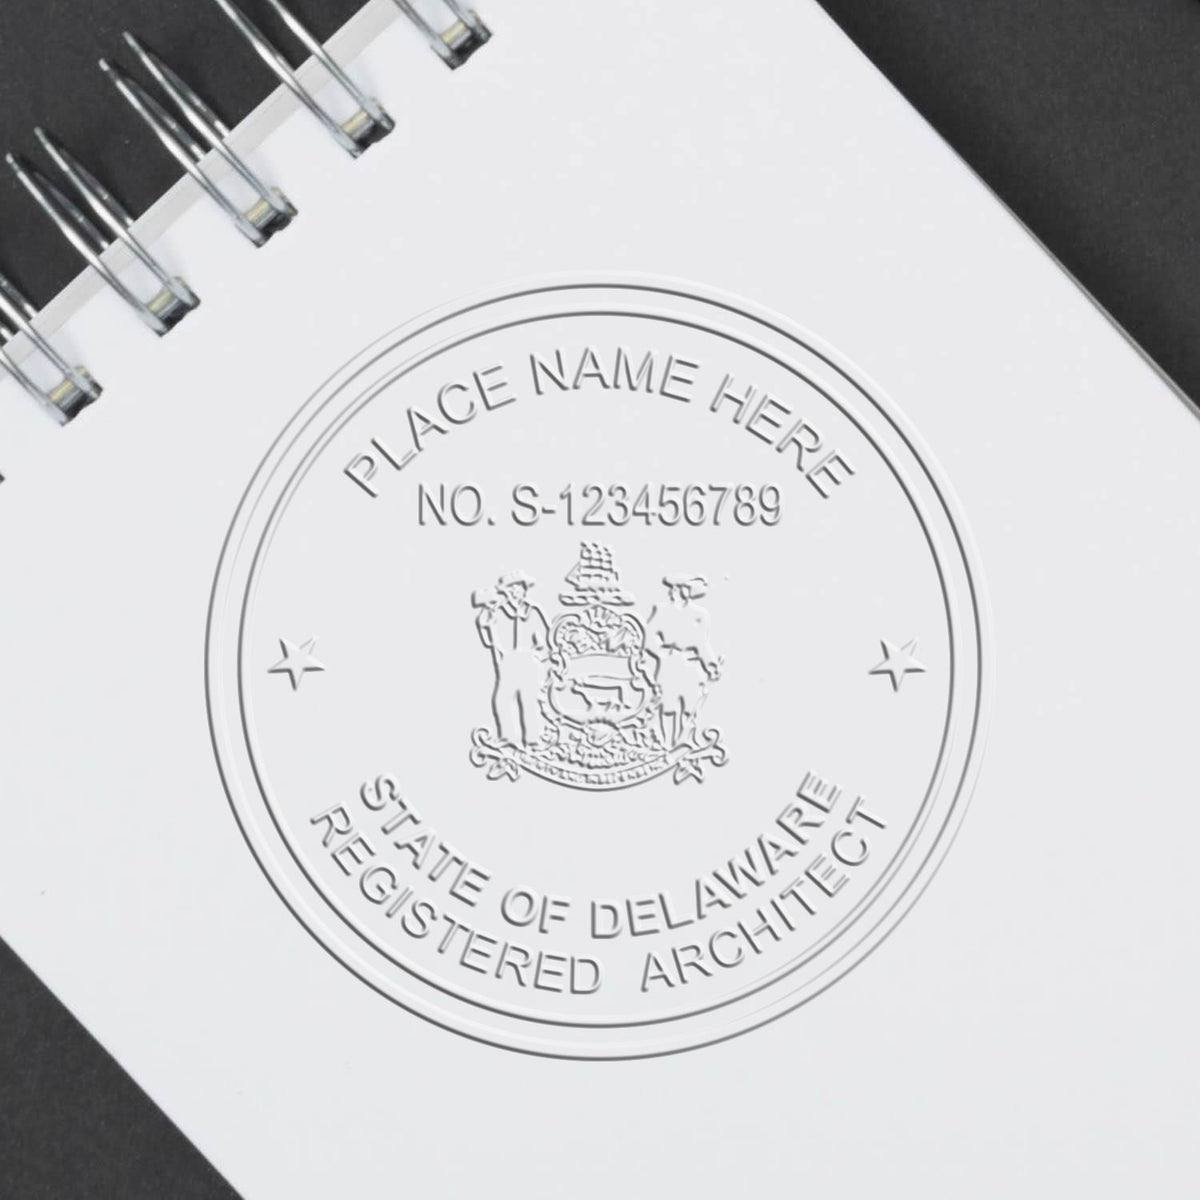 The State of Delaware Long Reach Architectural Embossing Seal stamp impression comes to life with a crisp, detailed photo on paper - showcasing true professional quality.